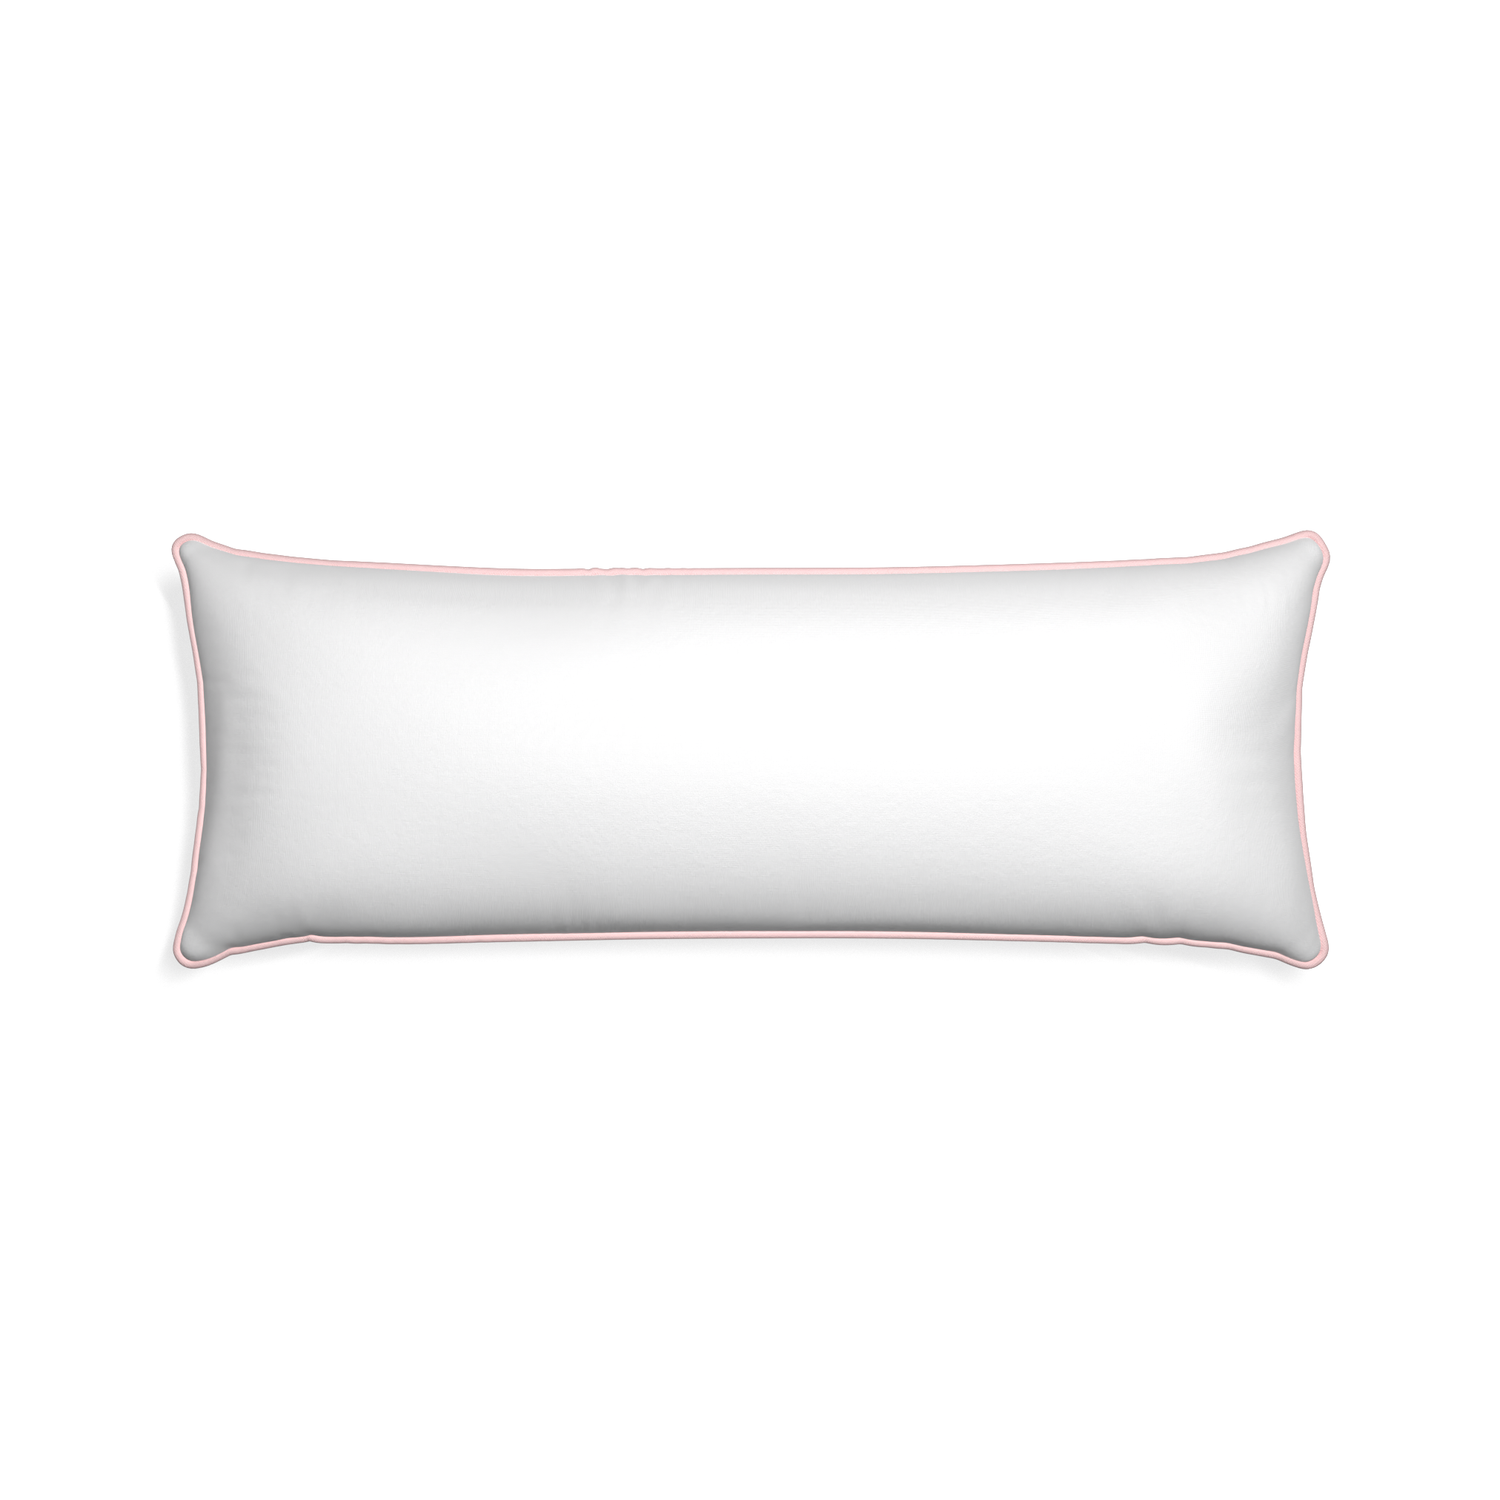 Xl-lumbar snow custom pillow with petal piping on white background